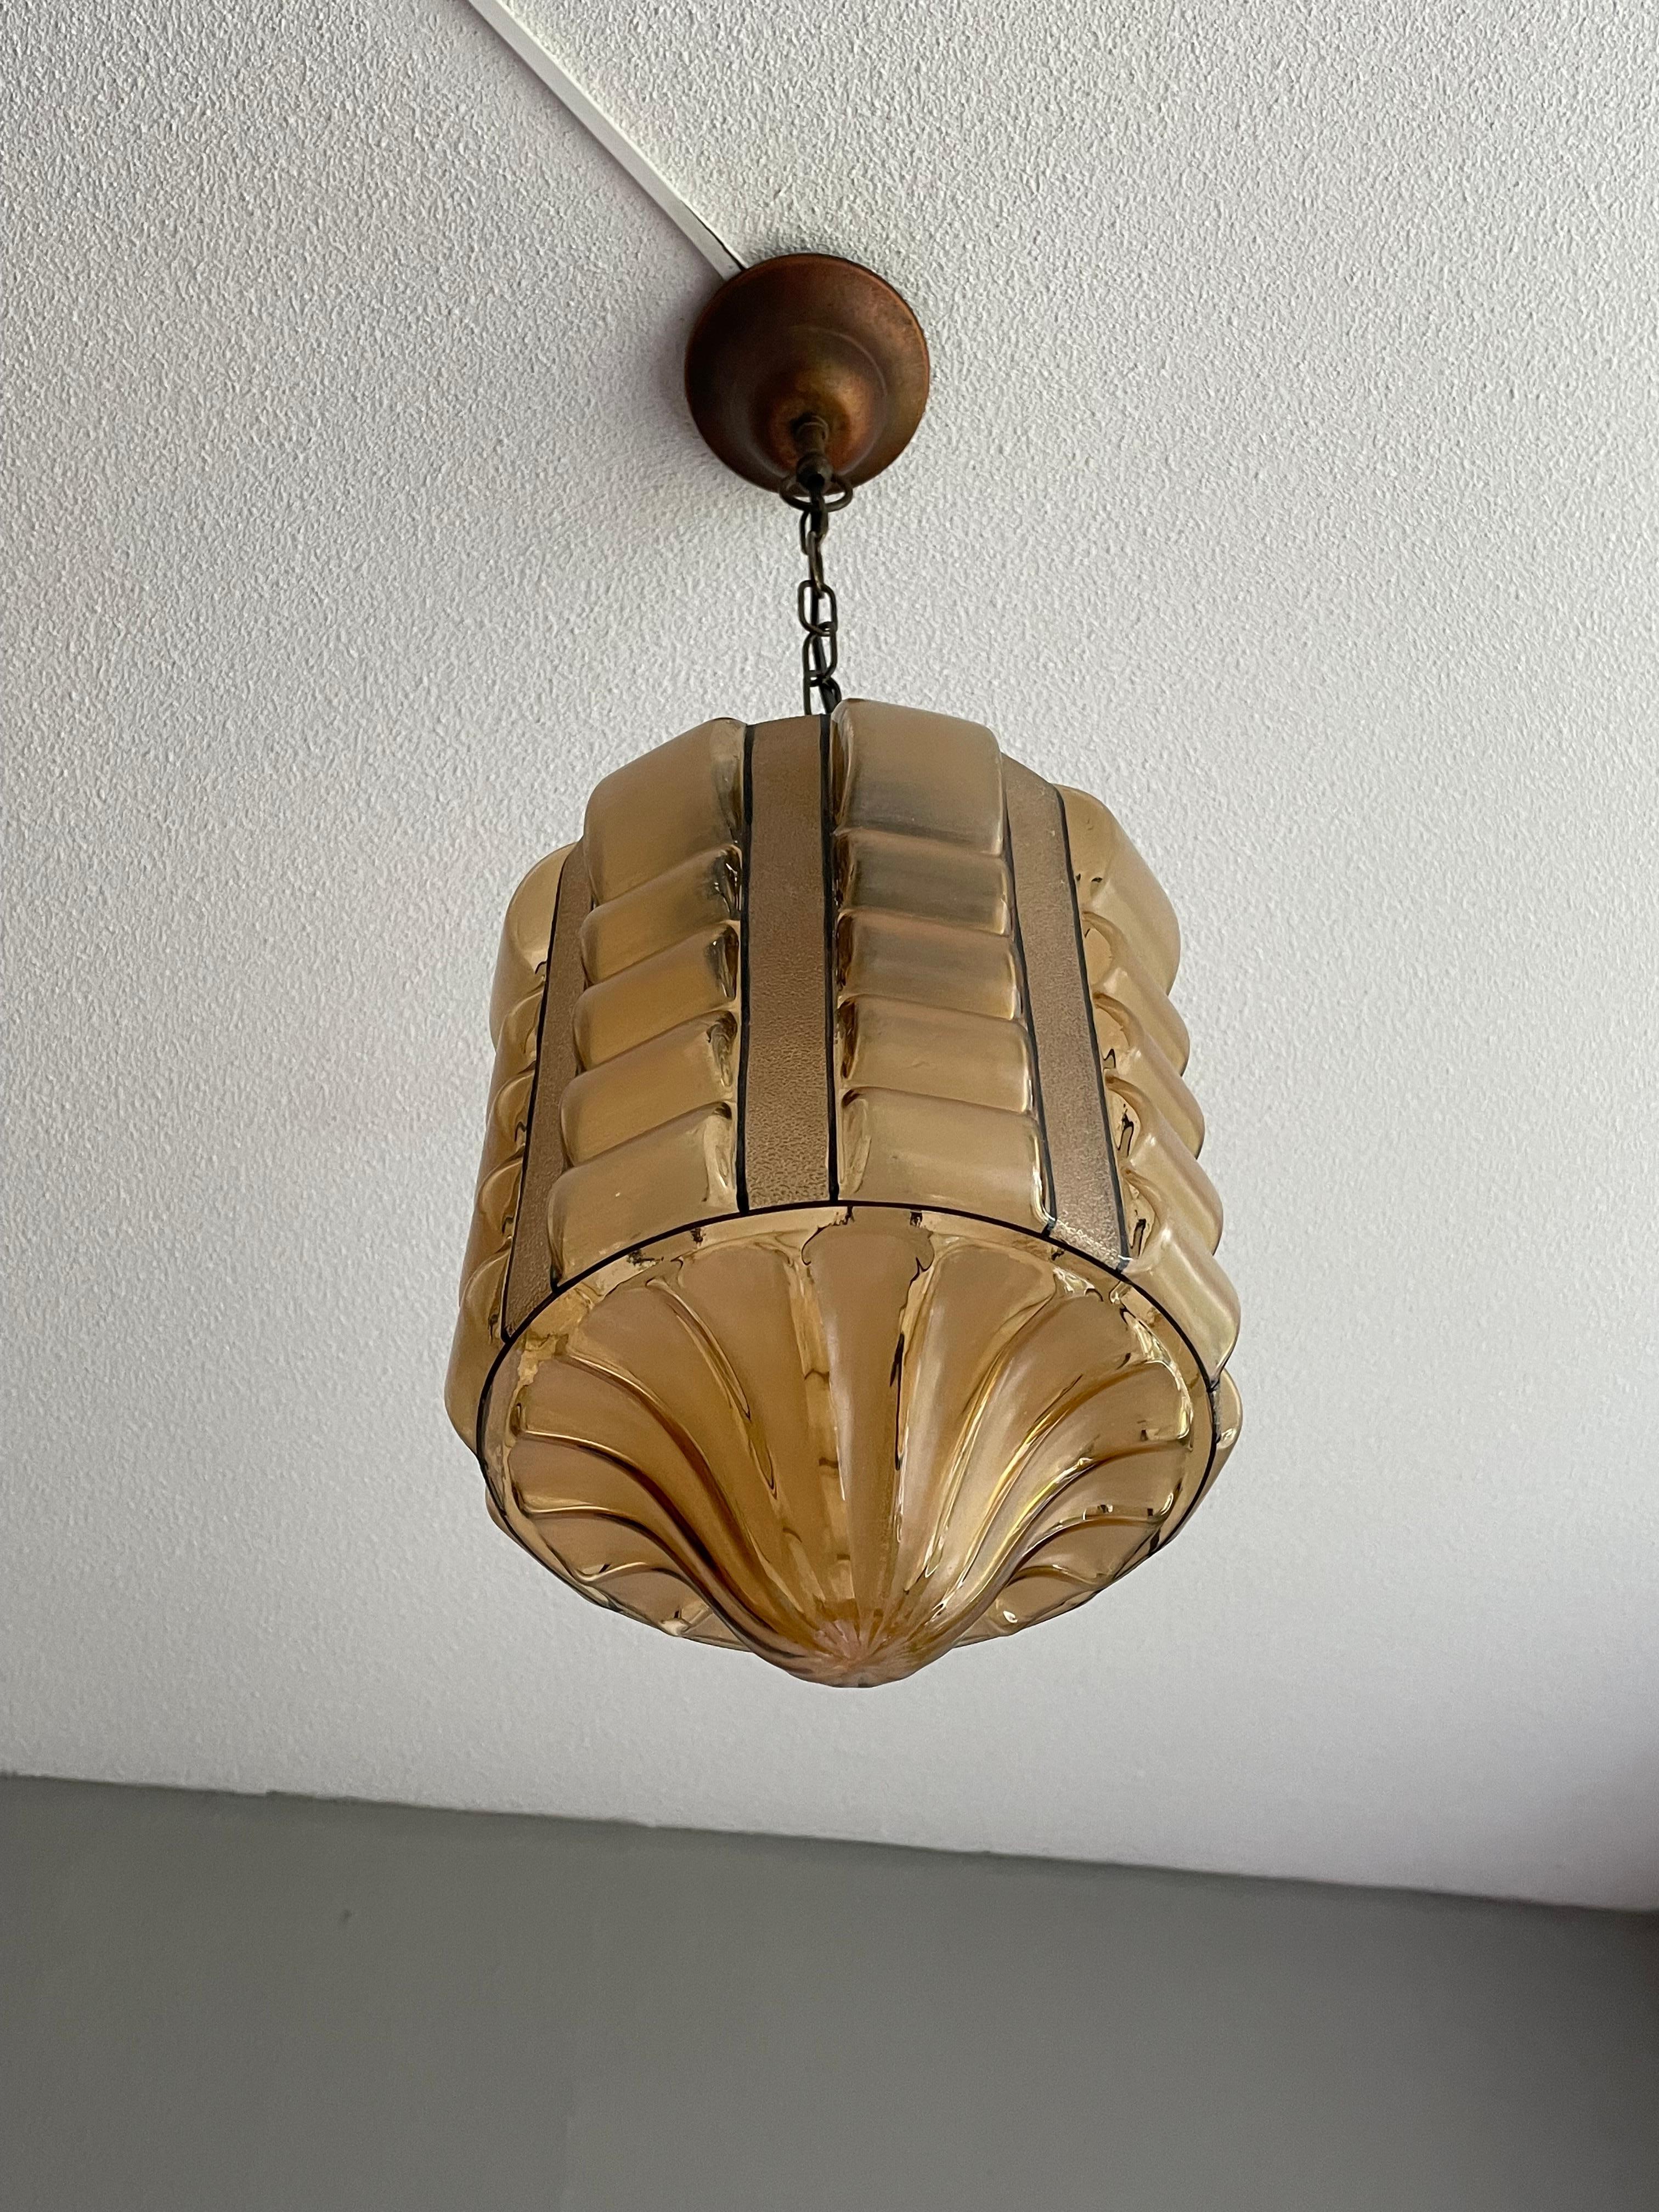 Etched Rare Rounded Geometrical Design Art Deco Pendant Light with Brass Chain & Canopy